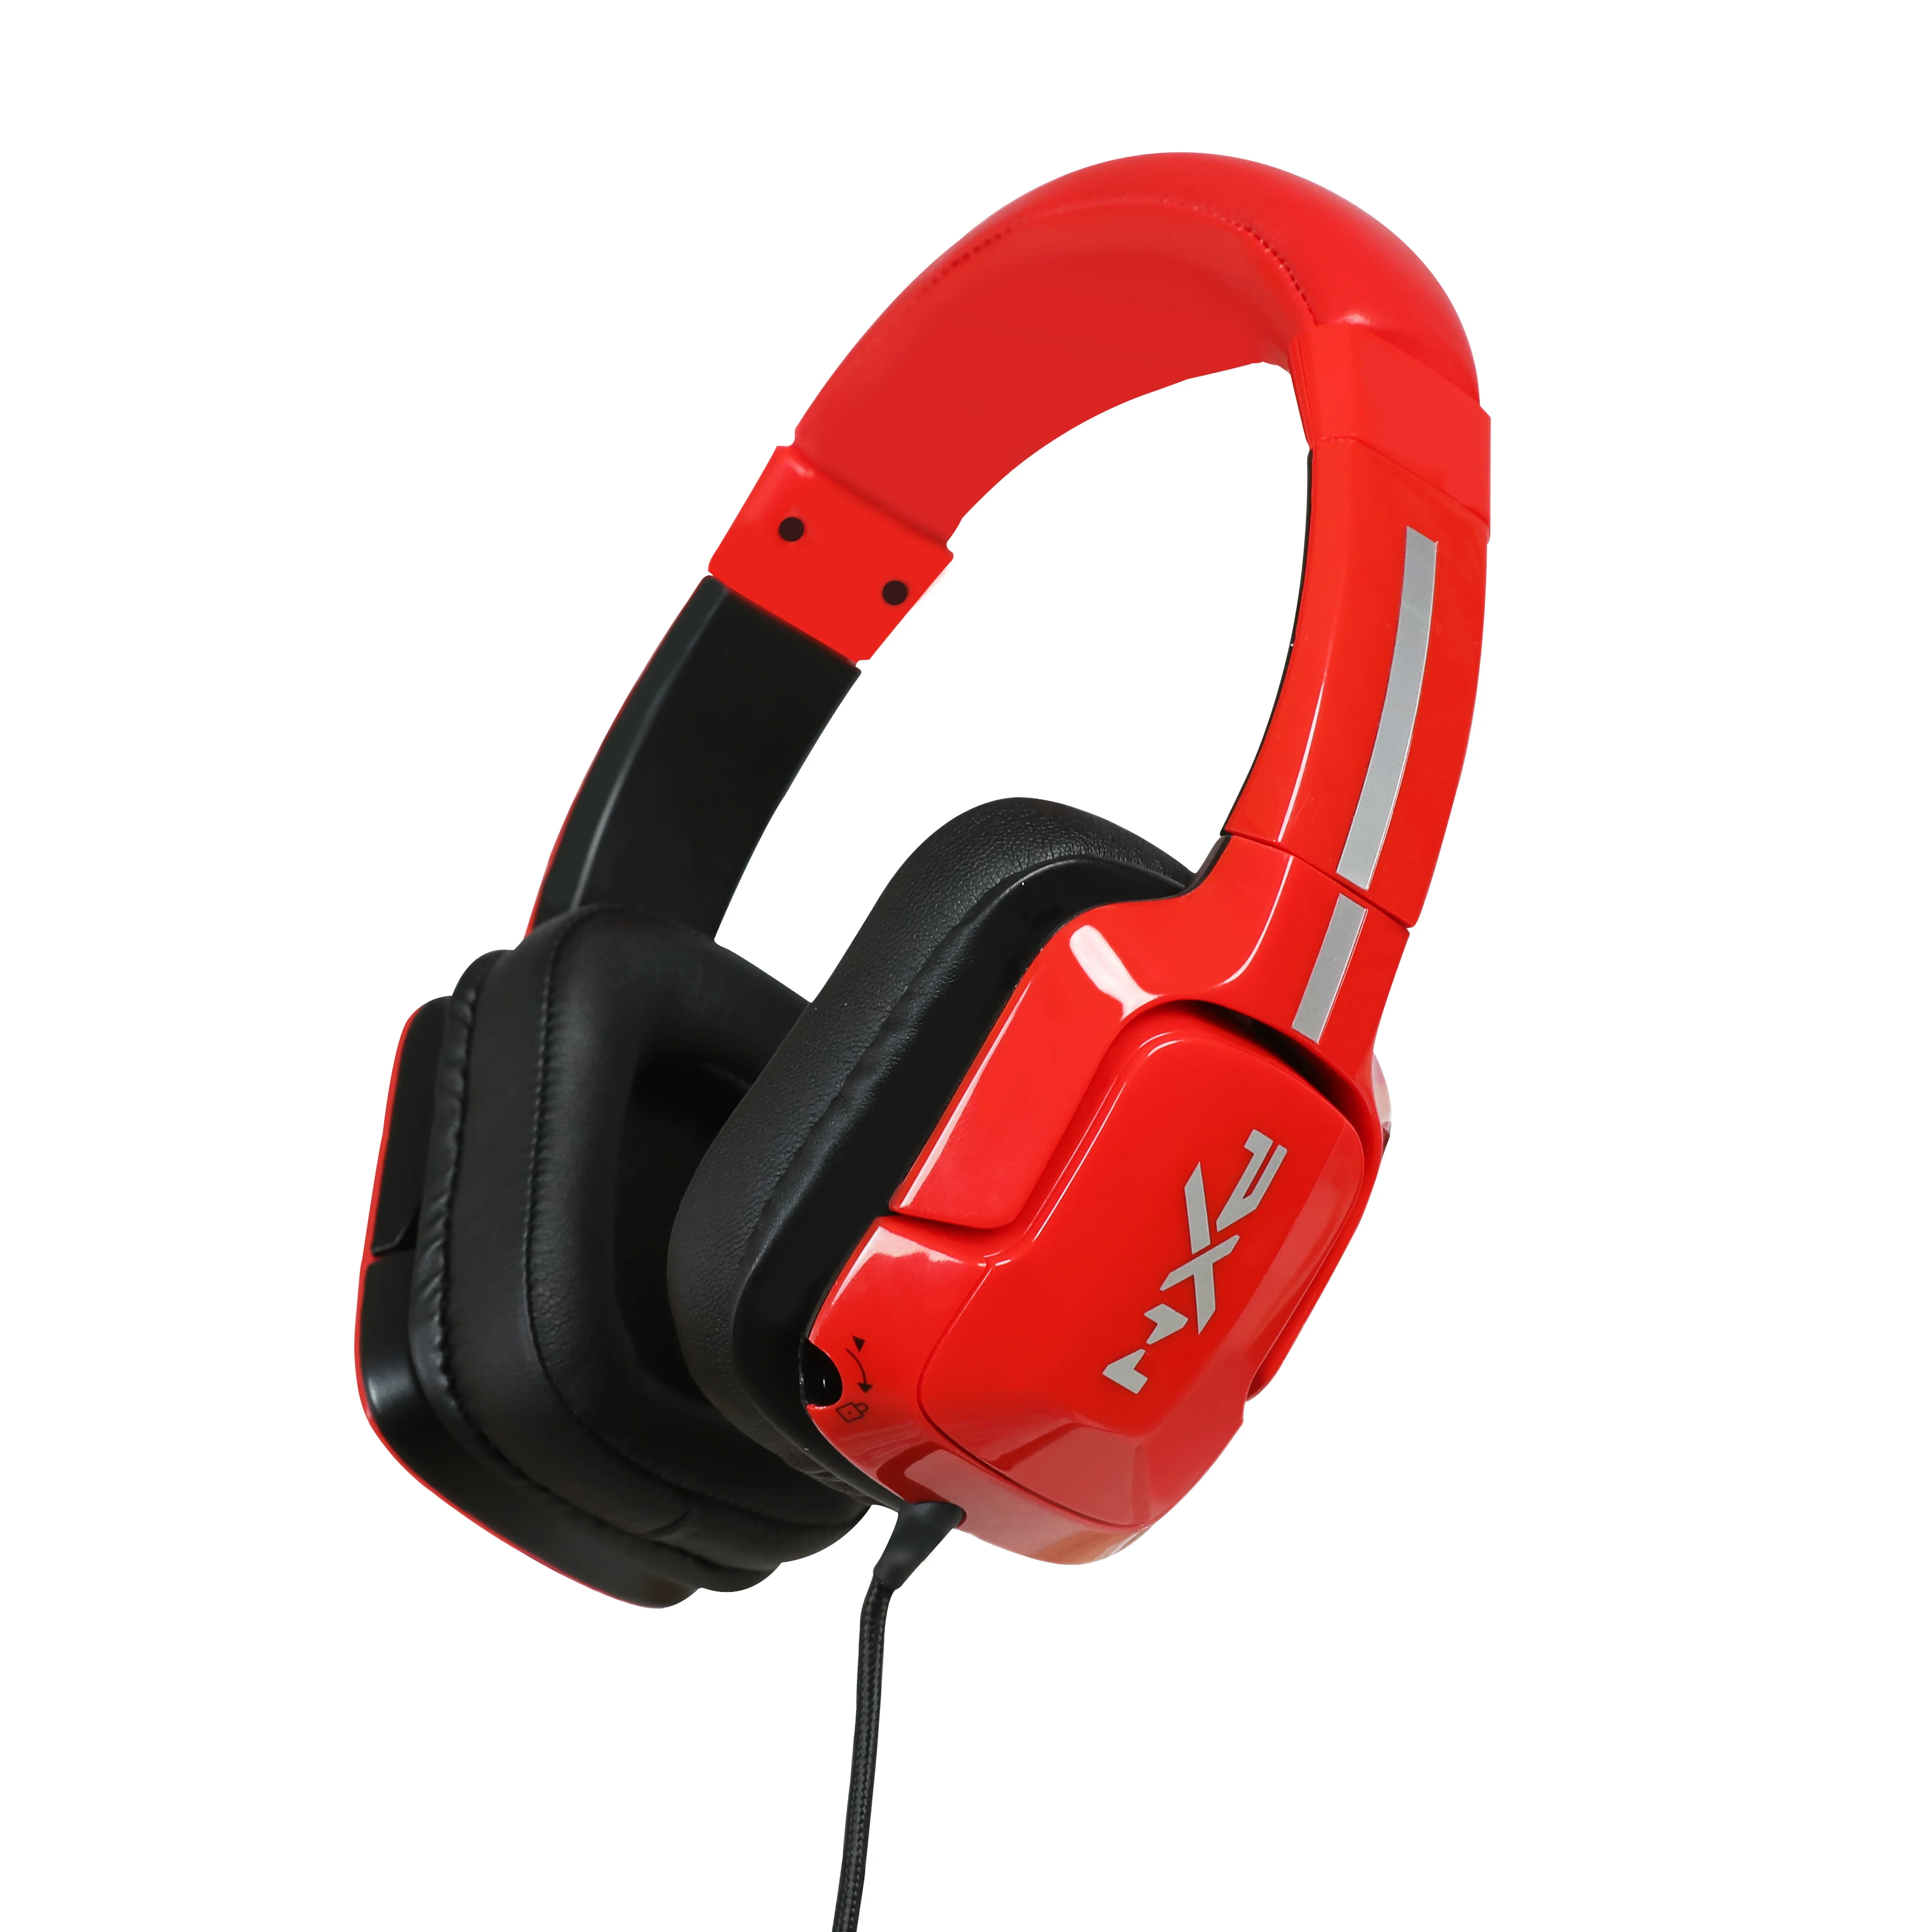 U305 USB Headset, Gaming Headset for PC, Xbox1, PS4, SWITCH,MOBILE From m.alibaba.com